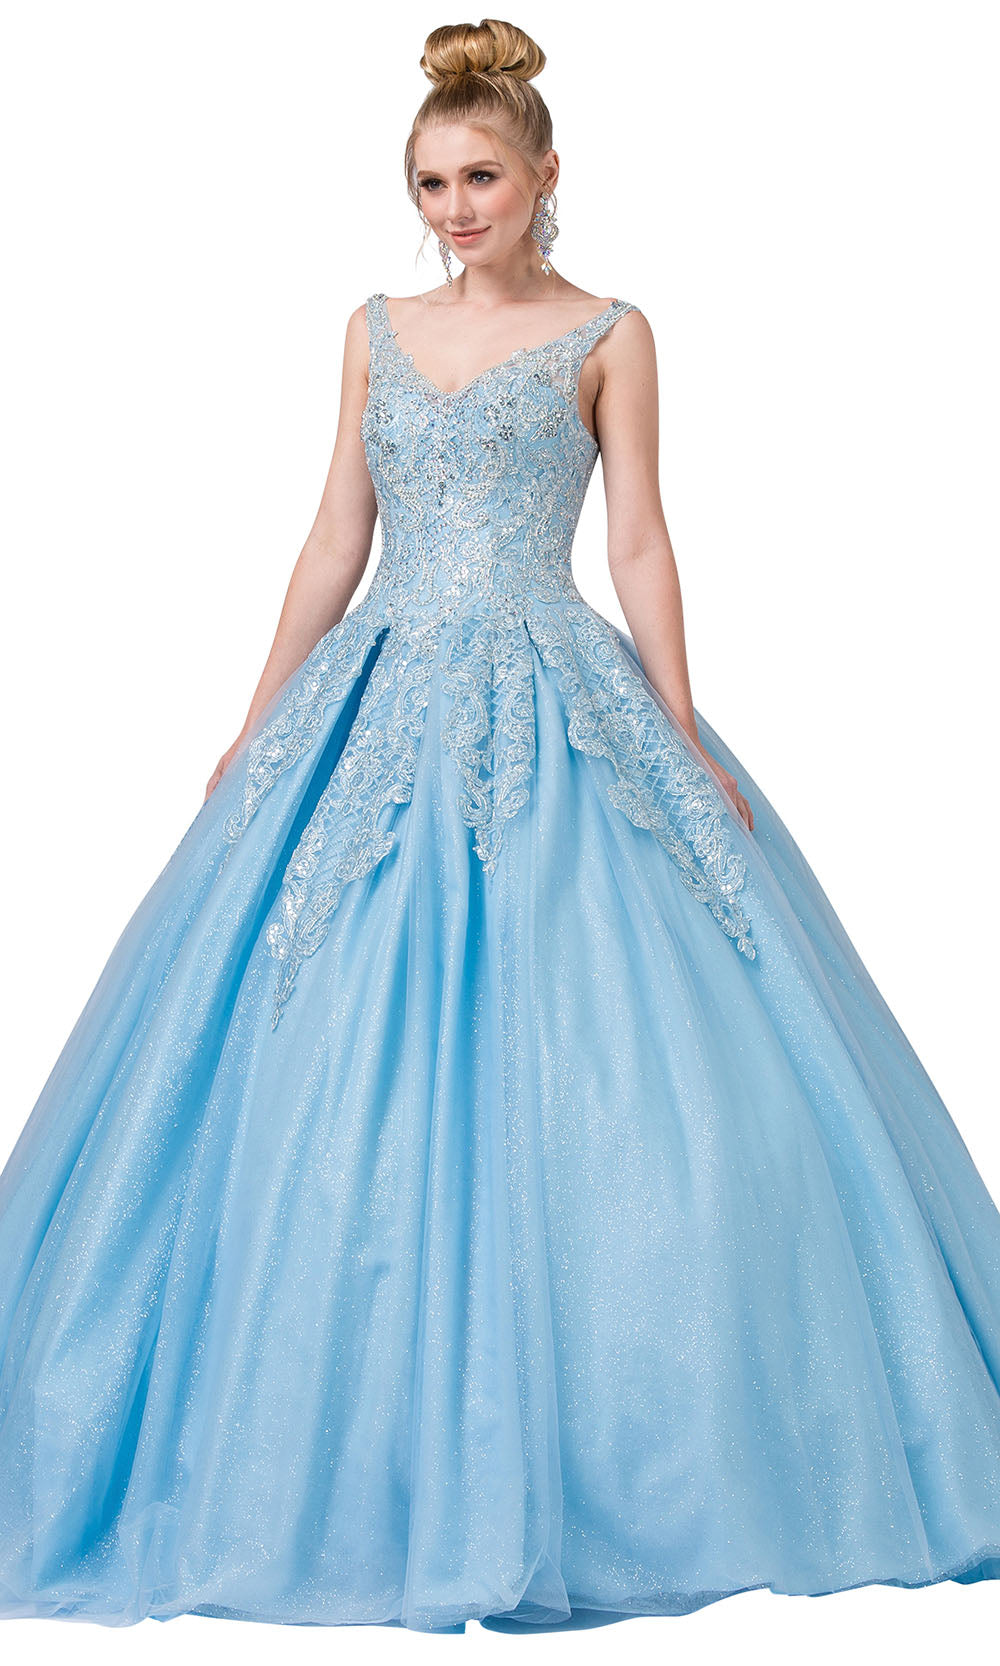 Dancing Queen - 1271 Embroidered Wide V Neck Ballgown In Blue